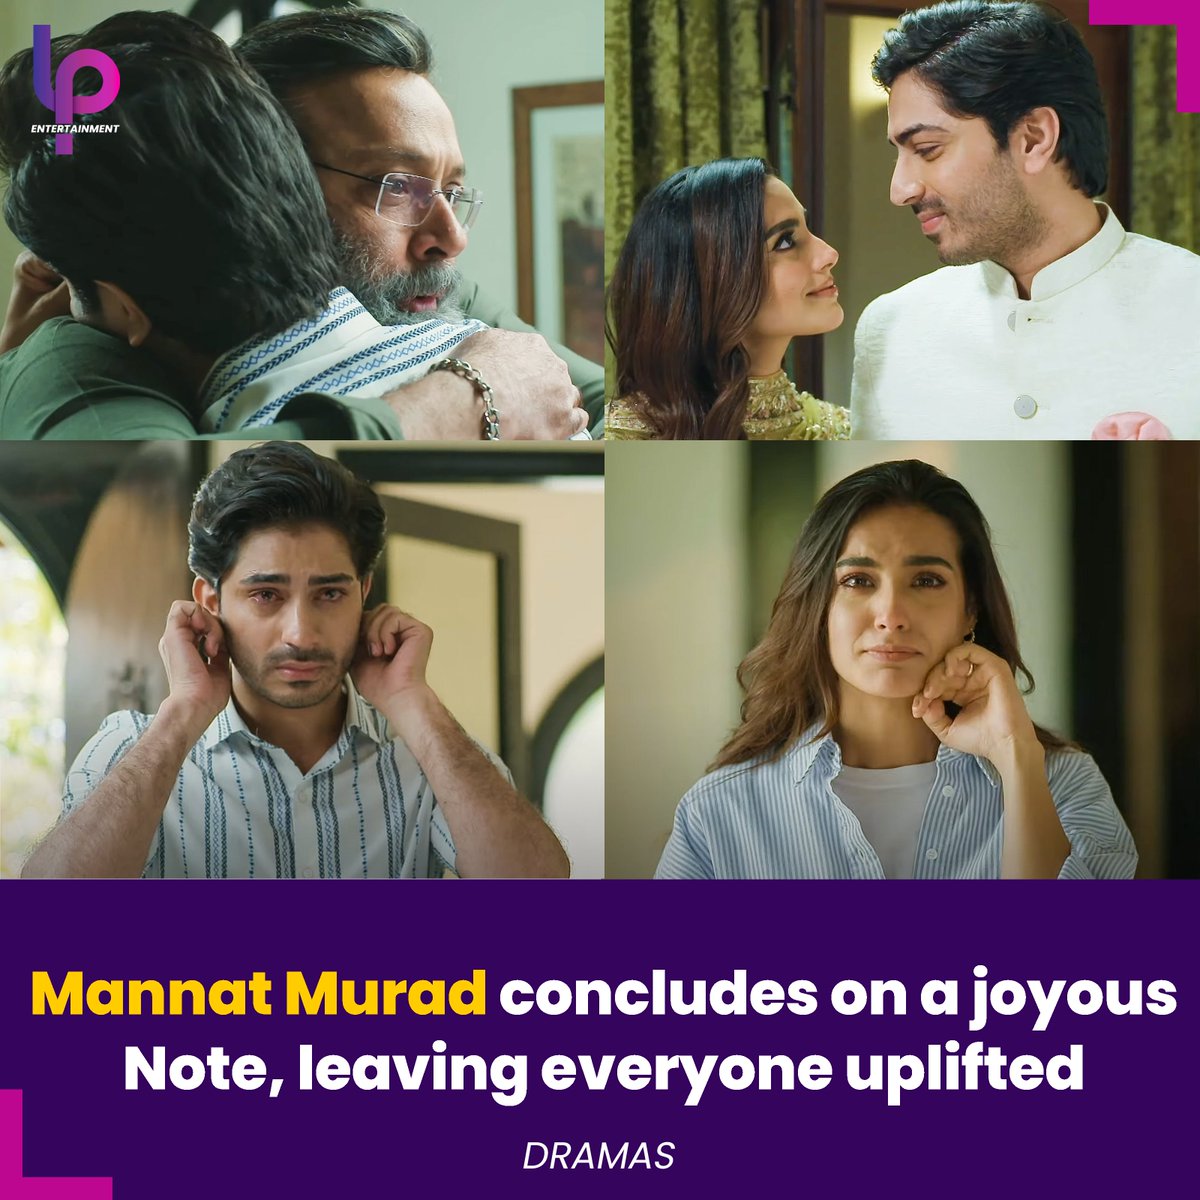 🌟#MannatMurad's Love Story ends on a high note, imparting a profound lesson: the importance of embracing and respecting the unique dynamics of every relationship. This story underscores the value of giving space and understanding to our connections with others, just as they are.